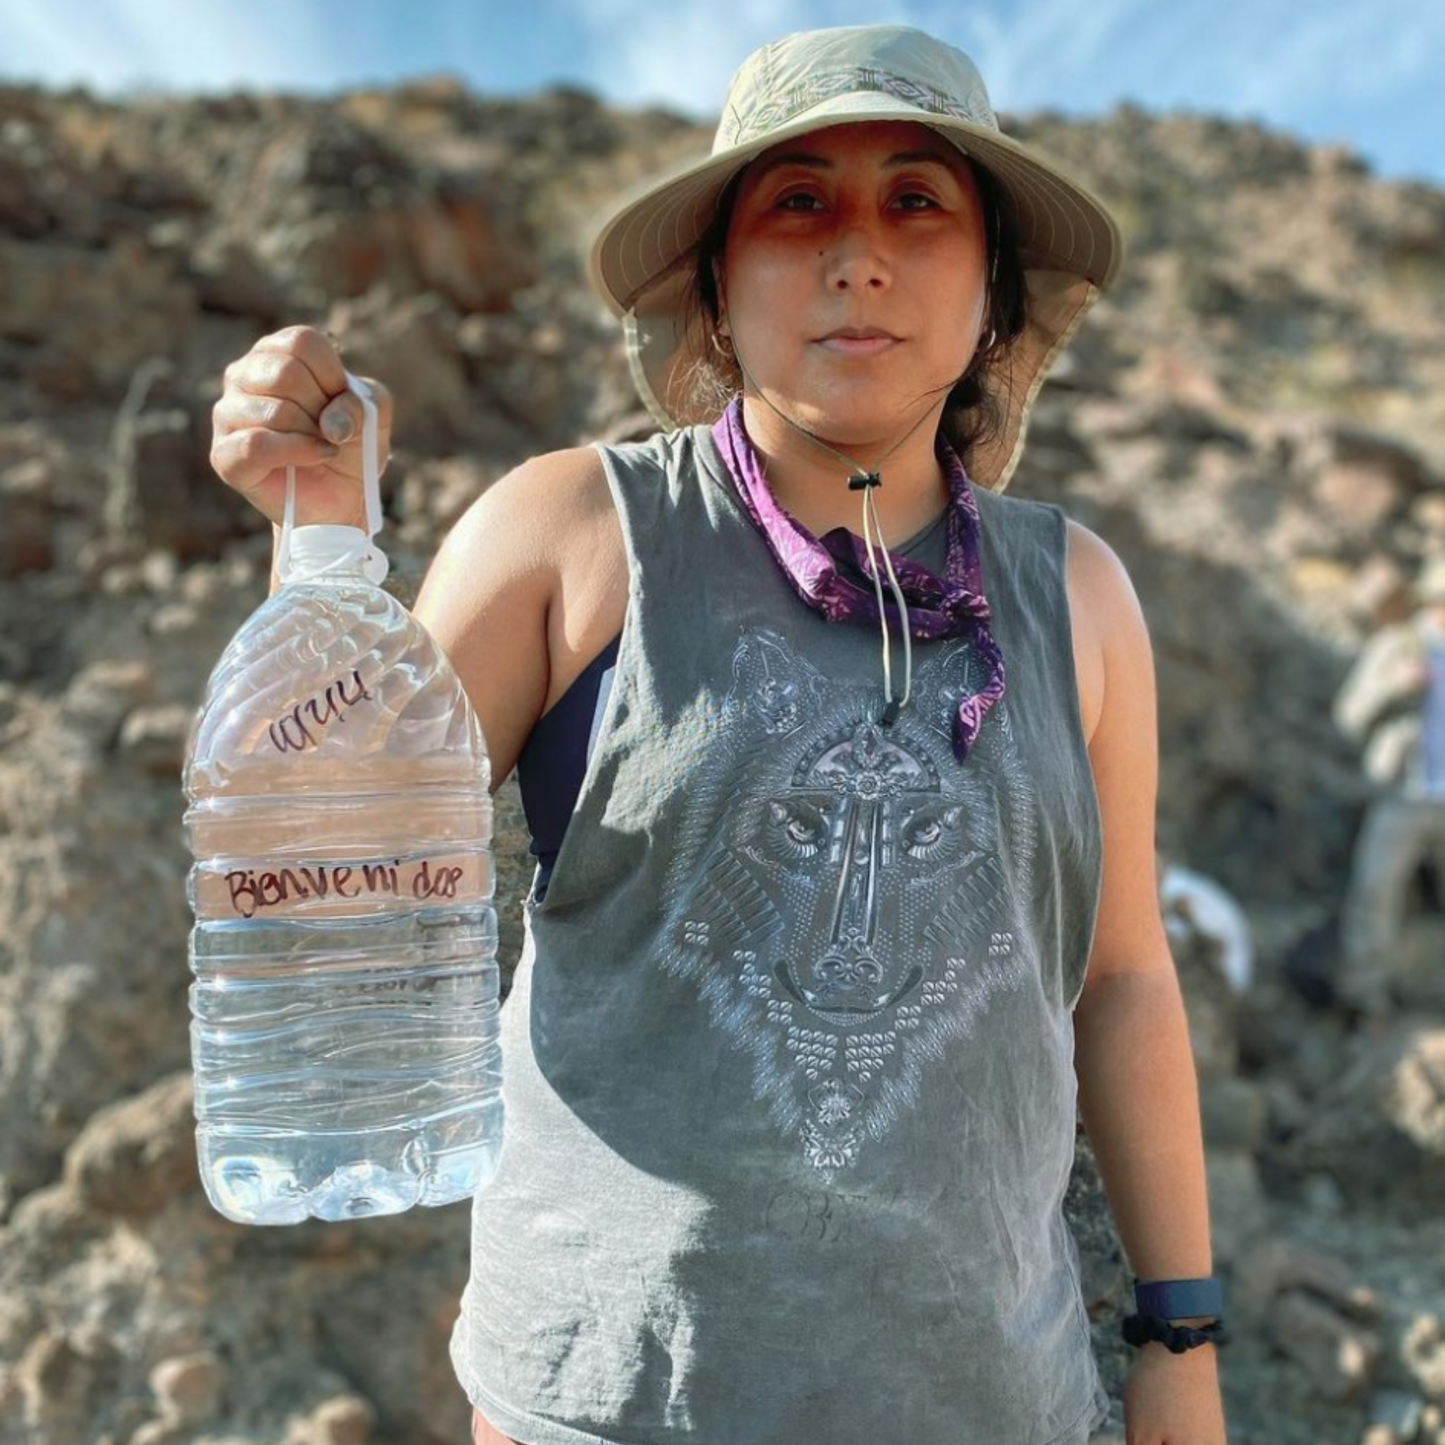 A woman with her hair tied back wearing a boonie hat. She is holding a five litre water bottle with the text Bienvenidos written across which means Welcome in English.